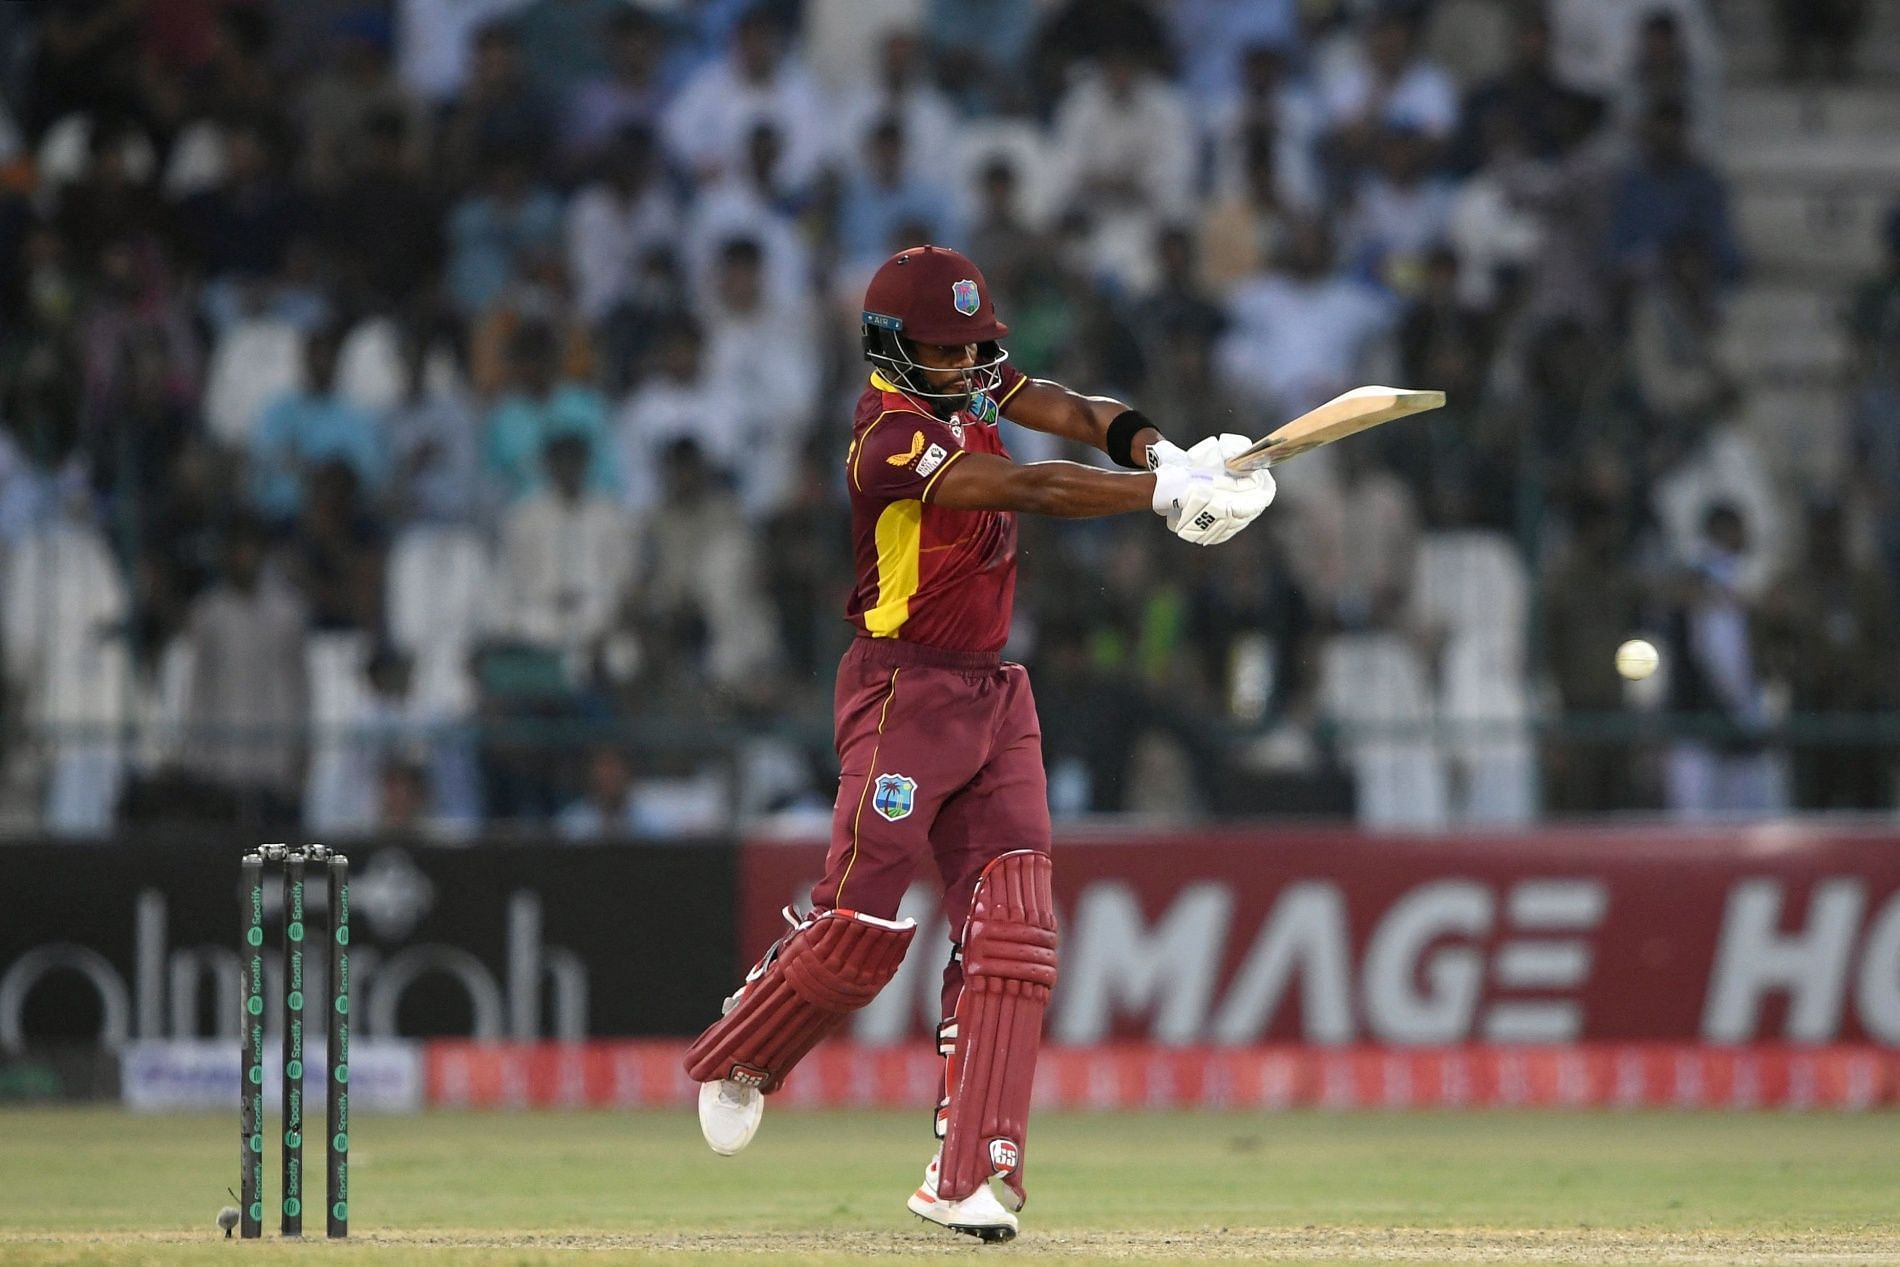 West Indies batter Shai Hope scored a hundred in his 100th ODI. Pic: ICC